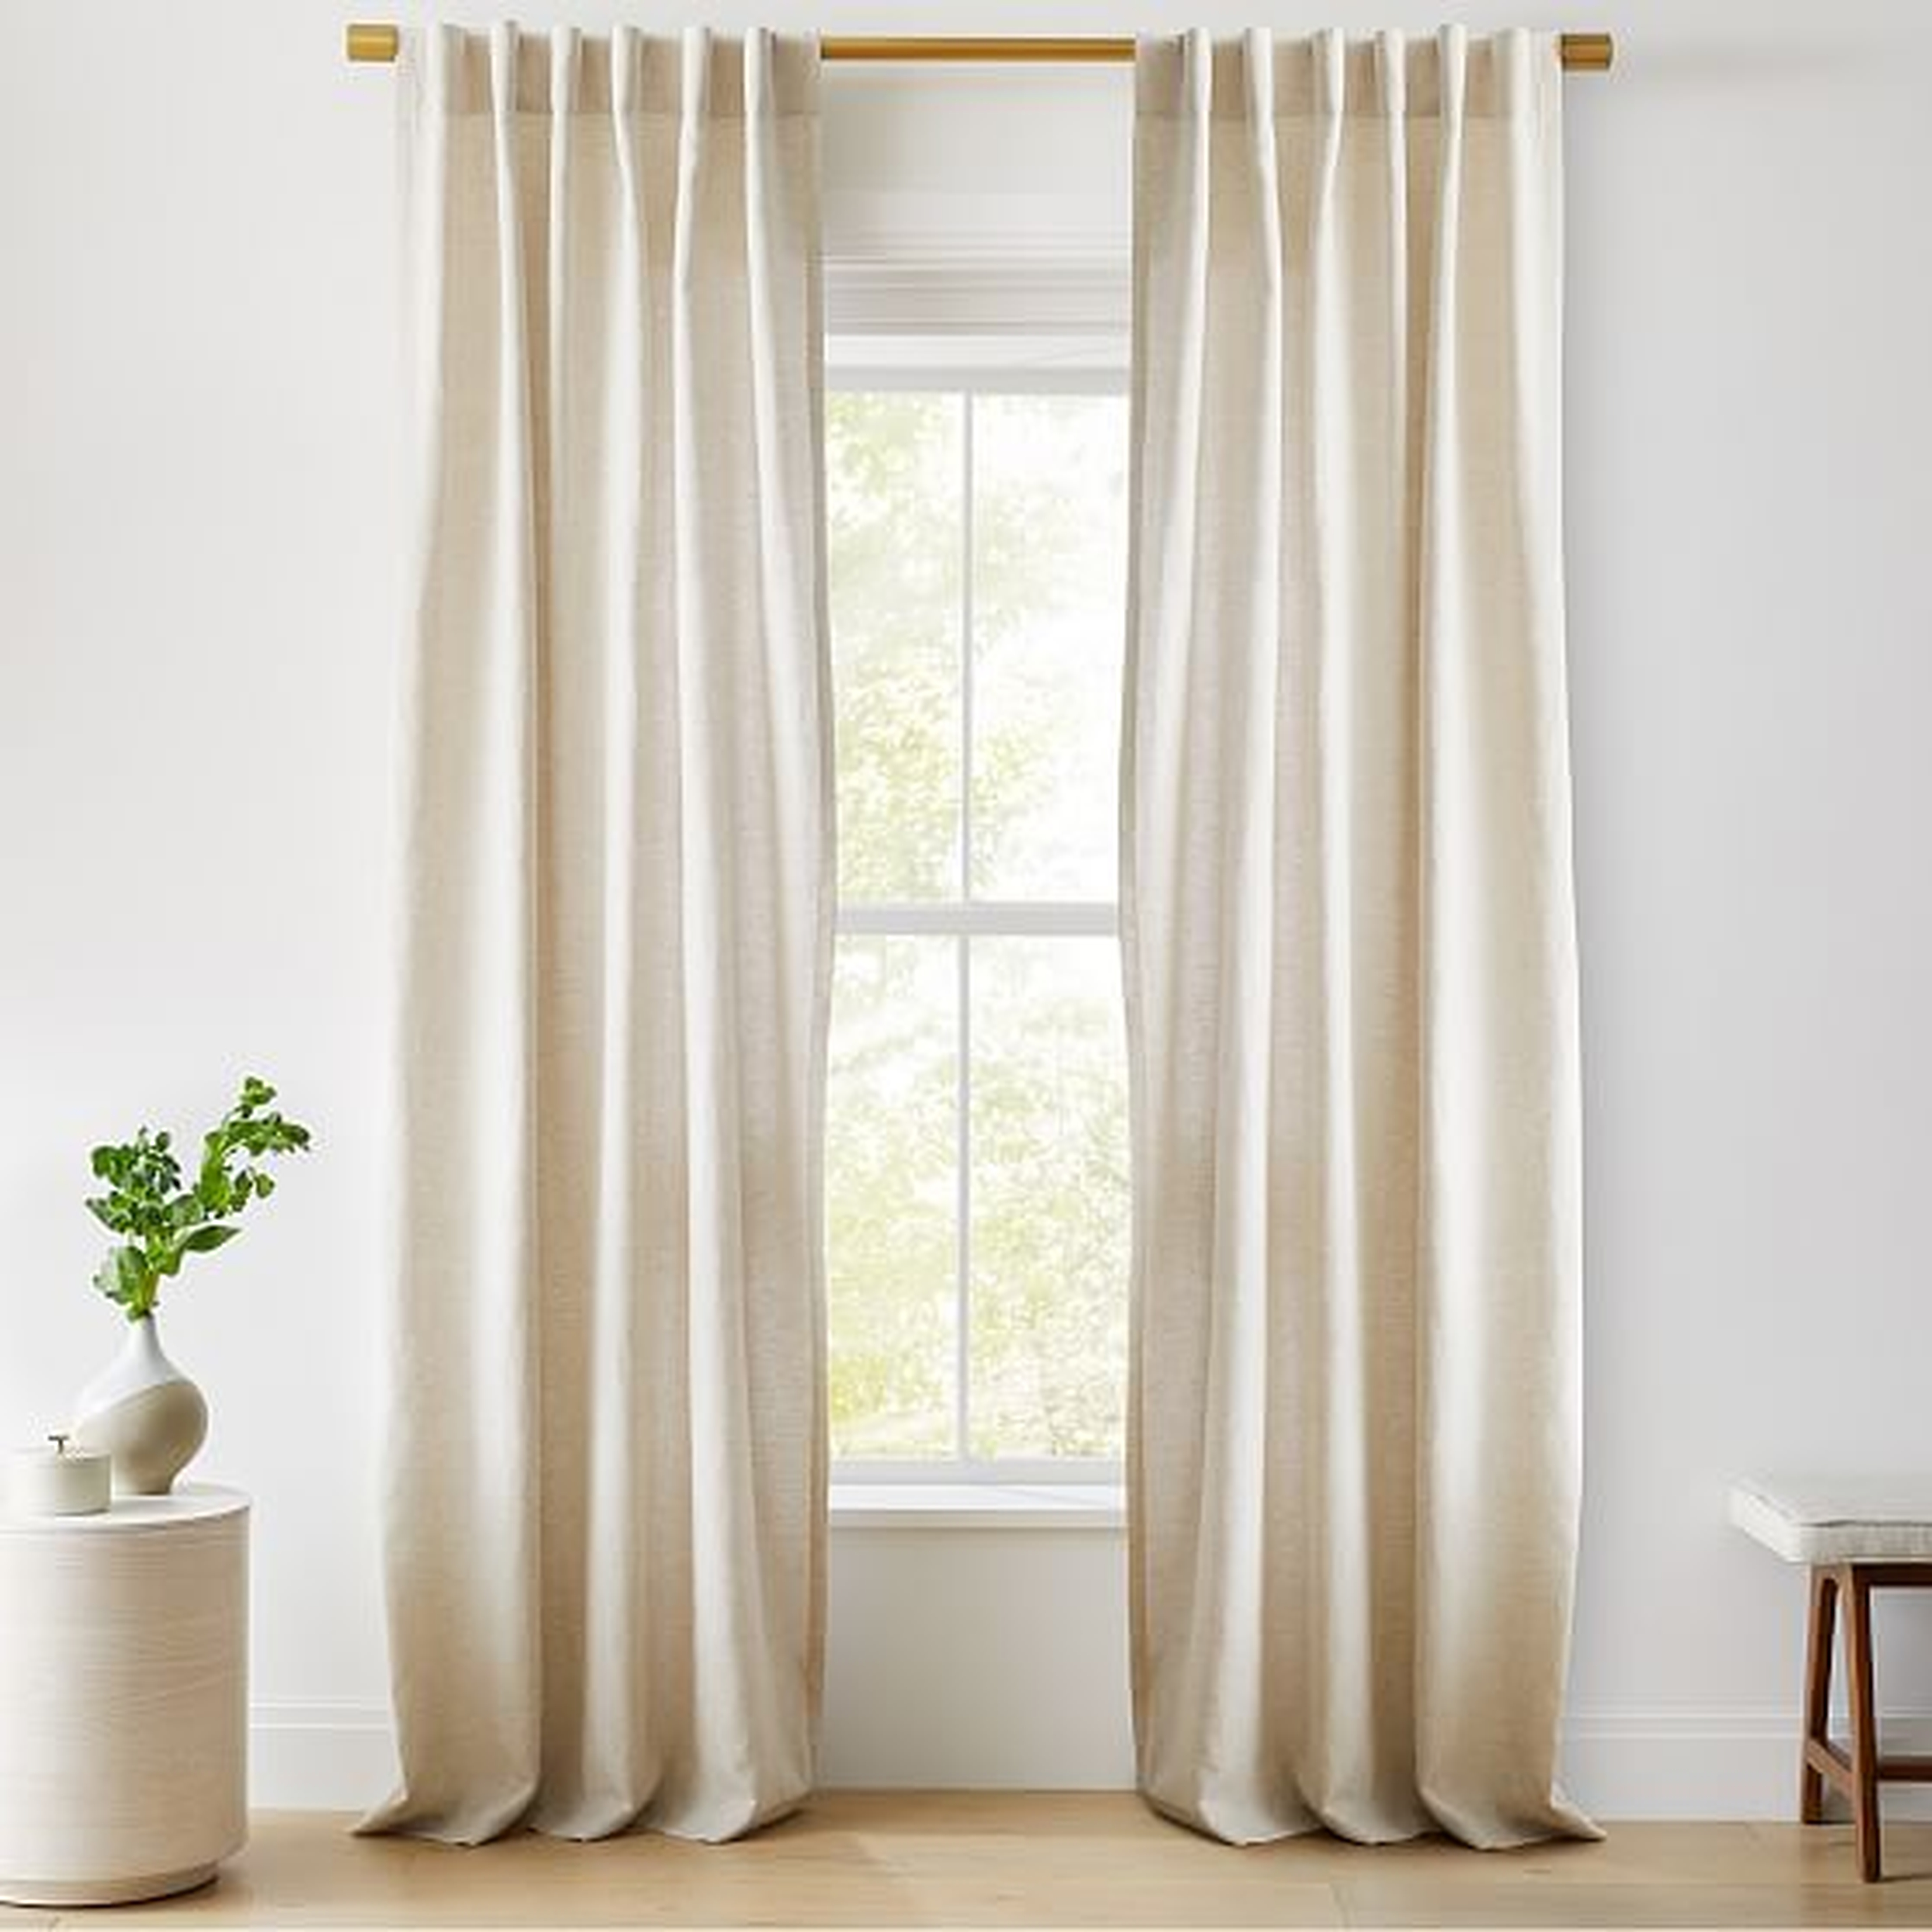 European Flax Linen Curtain with Cotton Lining, Natural, 48"x96", Set of 2 - West Elm